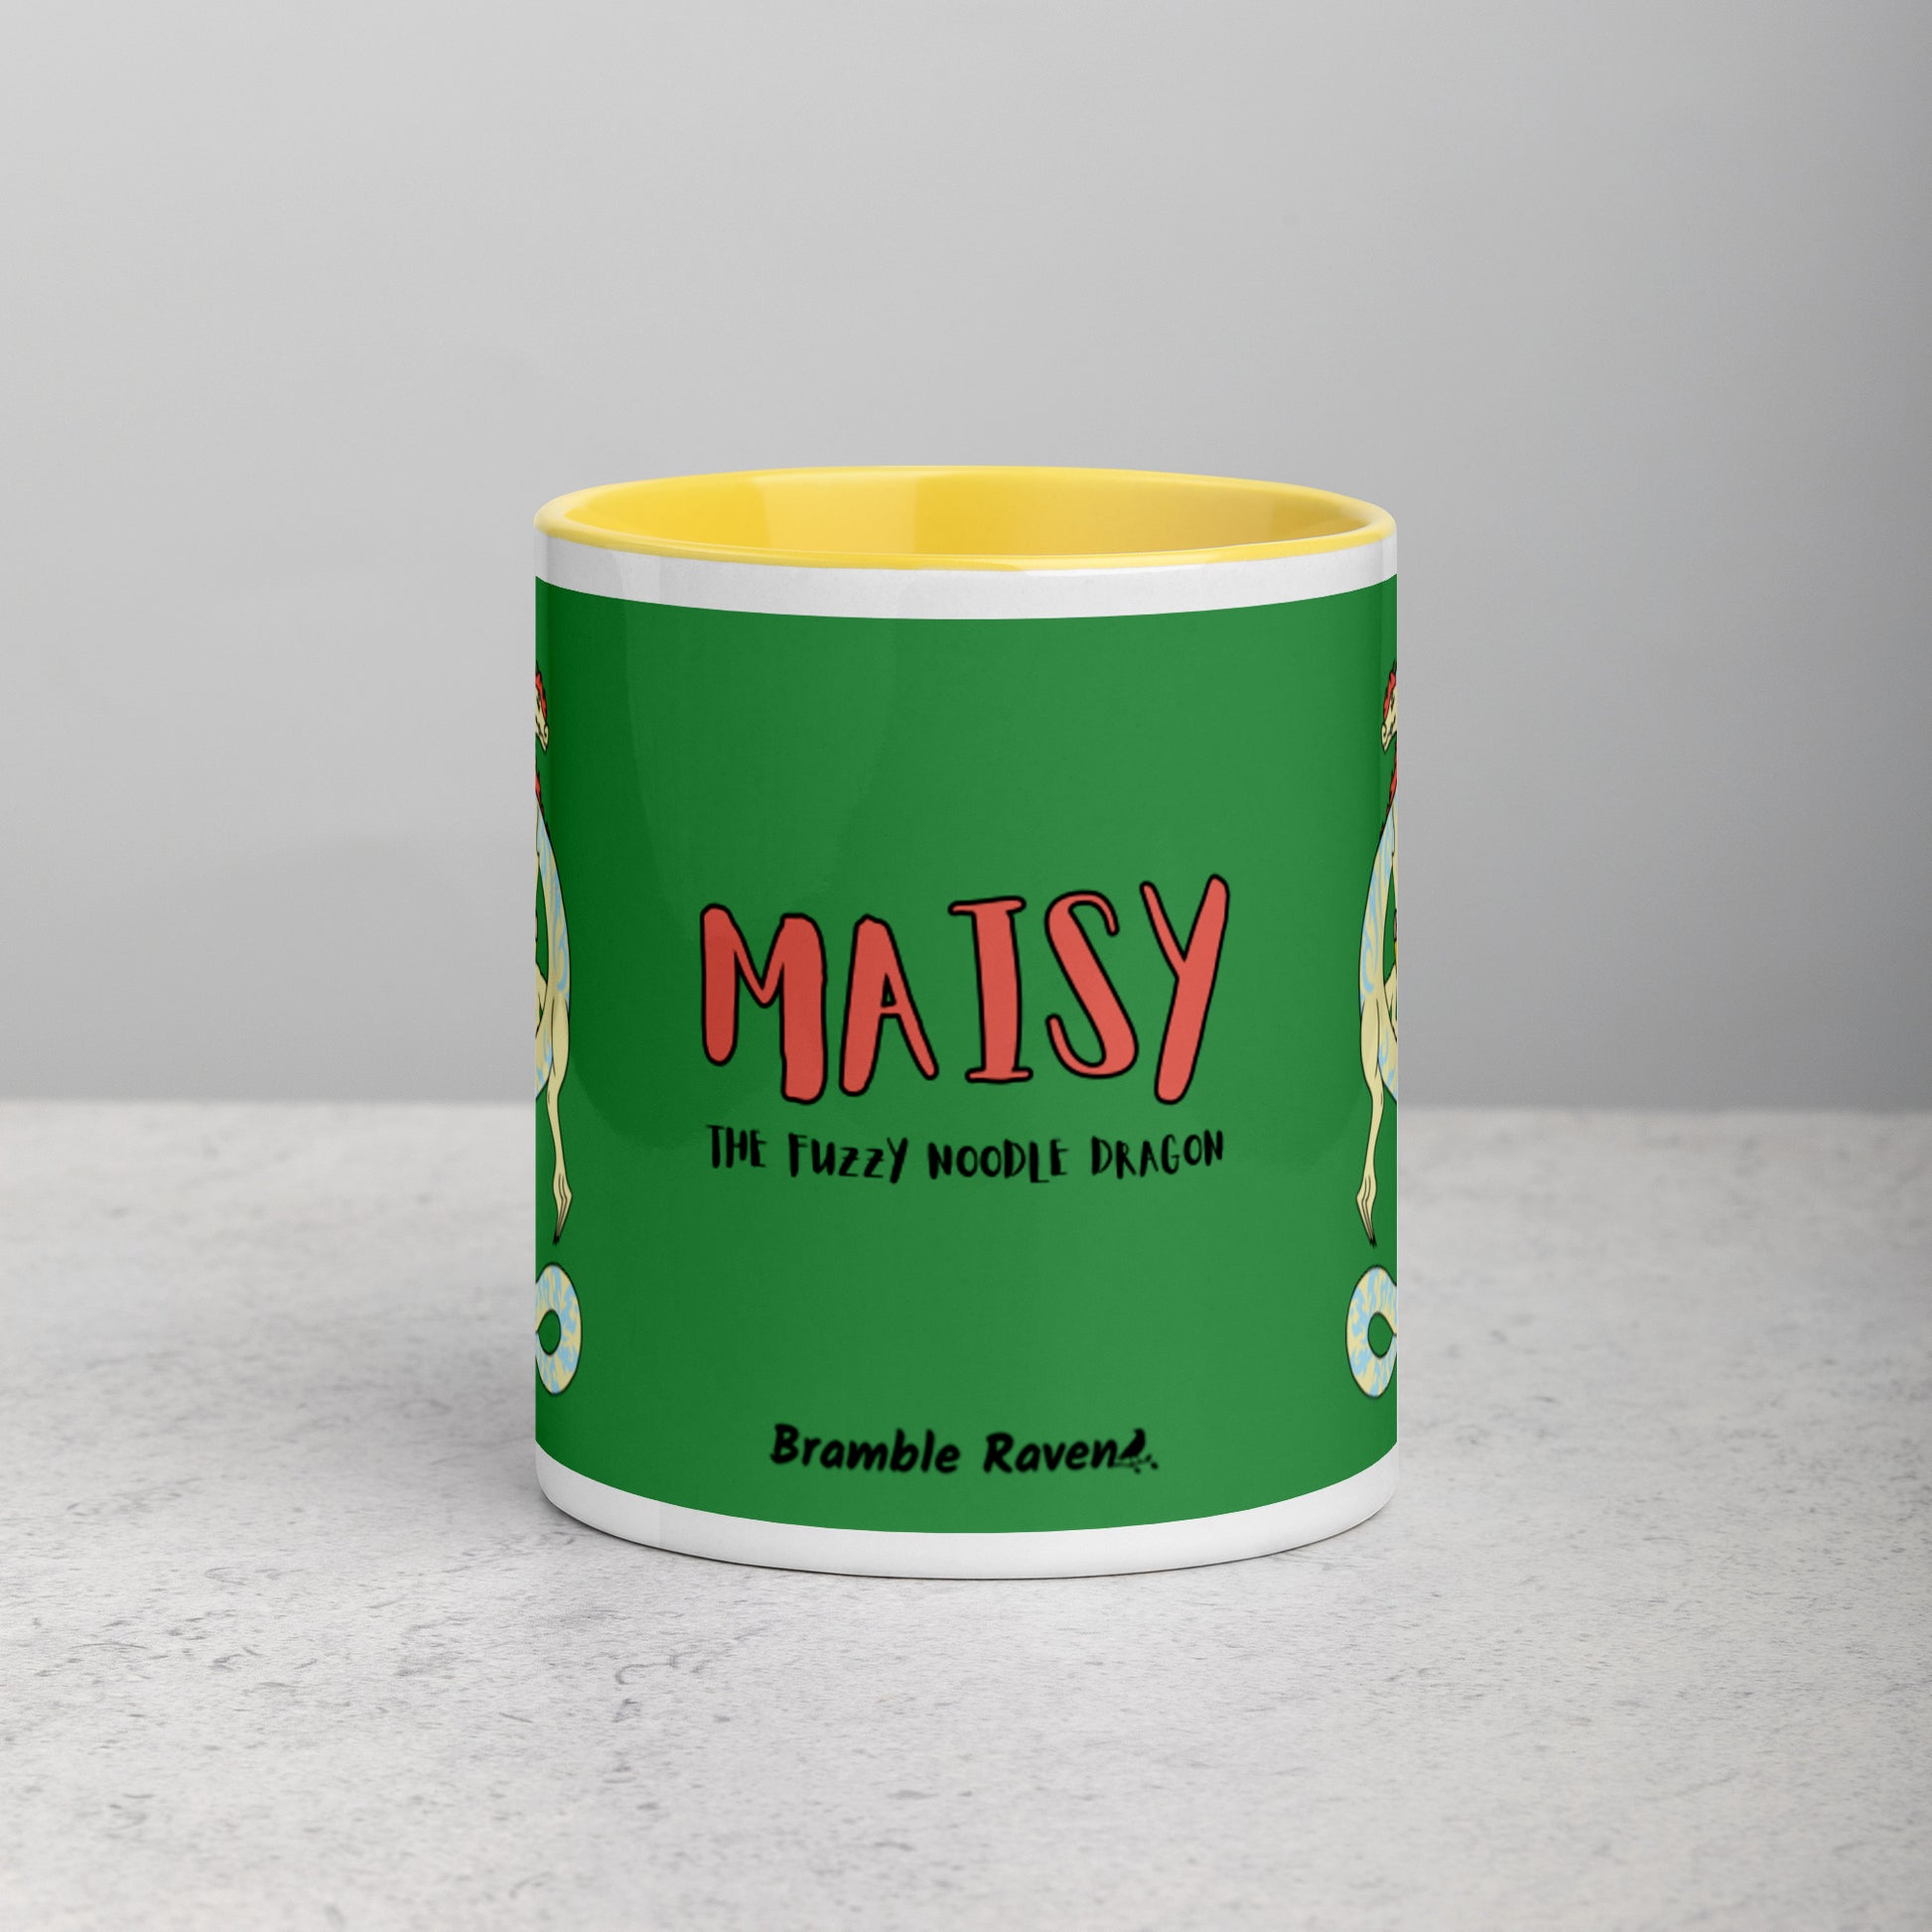 11 ounce white ceramic mug. Yellow inside and handle. Features double-sided image of Maisy the Fuzzy Noodle Dragon with a slice of pizza. Shown on tabletop. Front view of mug shows Maisy the Fuzzy Noodle Dragon text and Bramble Raven logo.